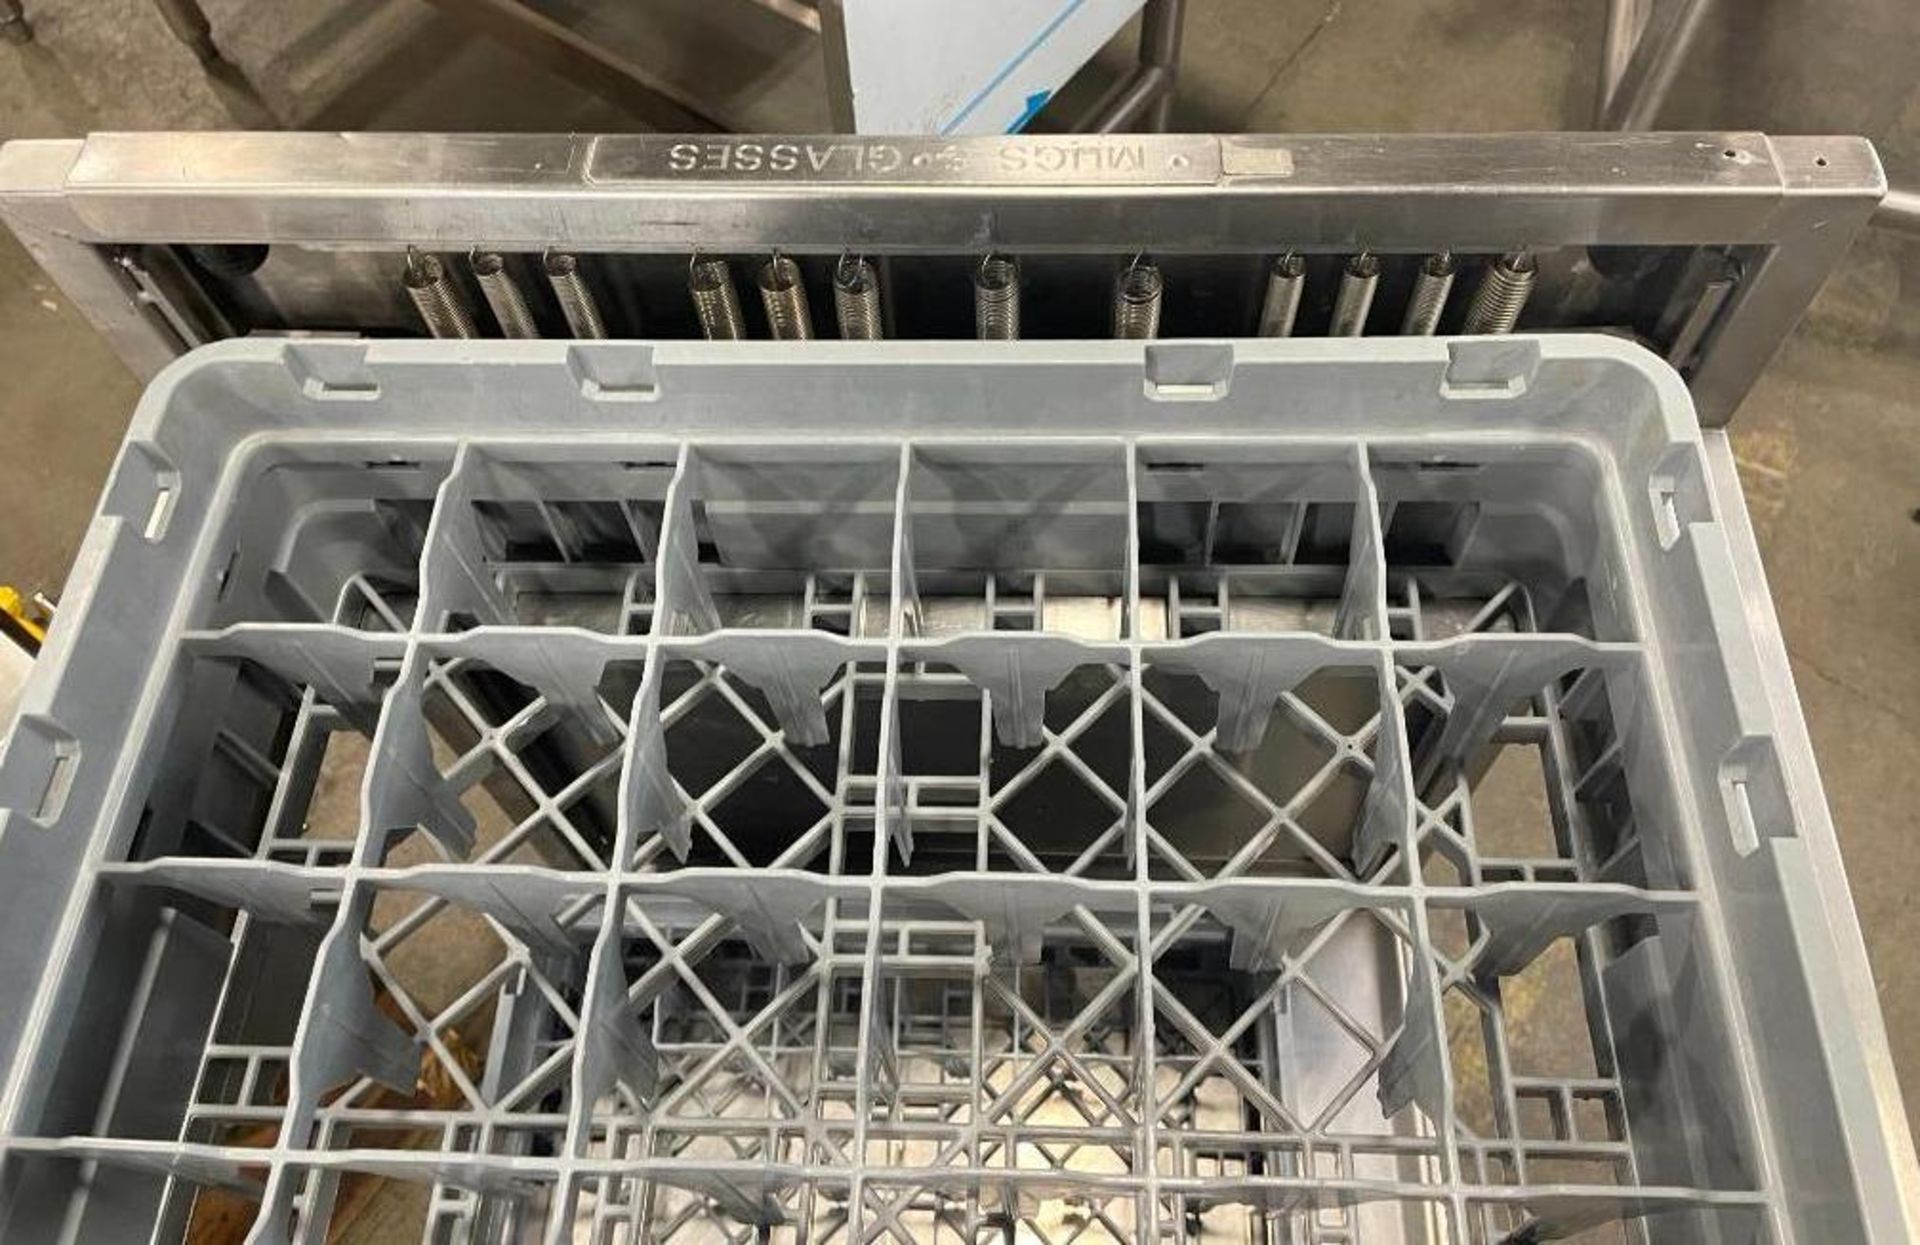 HATCH TRD-M-2020 MOBILE TRAY AND RACK DISPENSER, STAINLESS STEEL WITH 2 DISHWASHER RACKS - Image 3 of 6